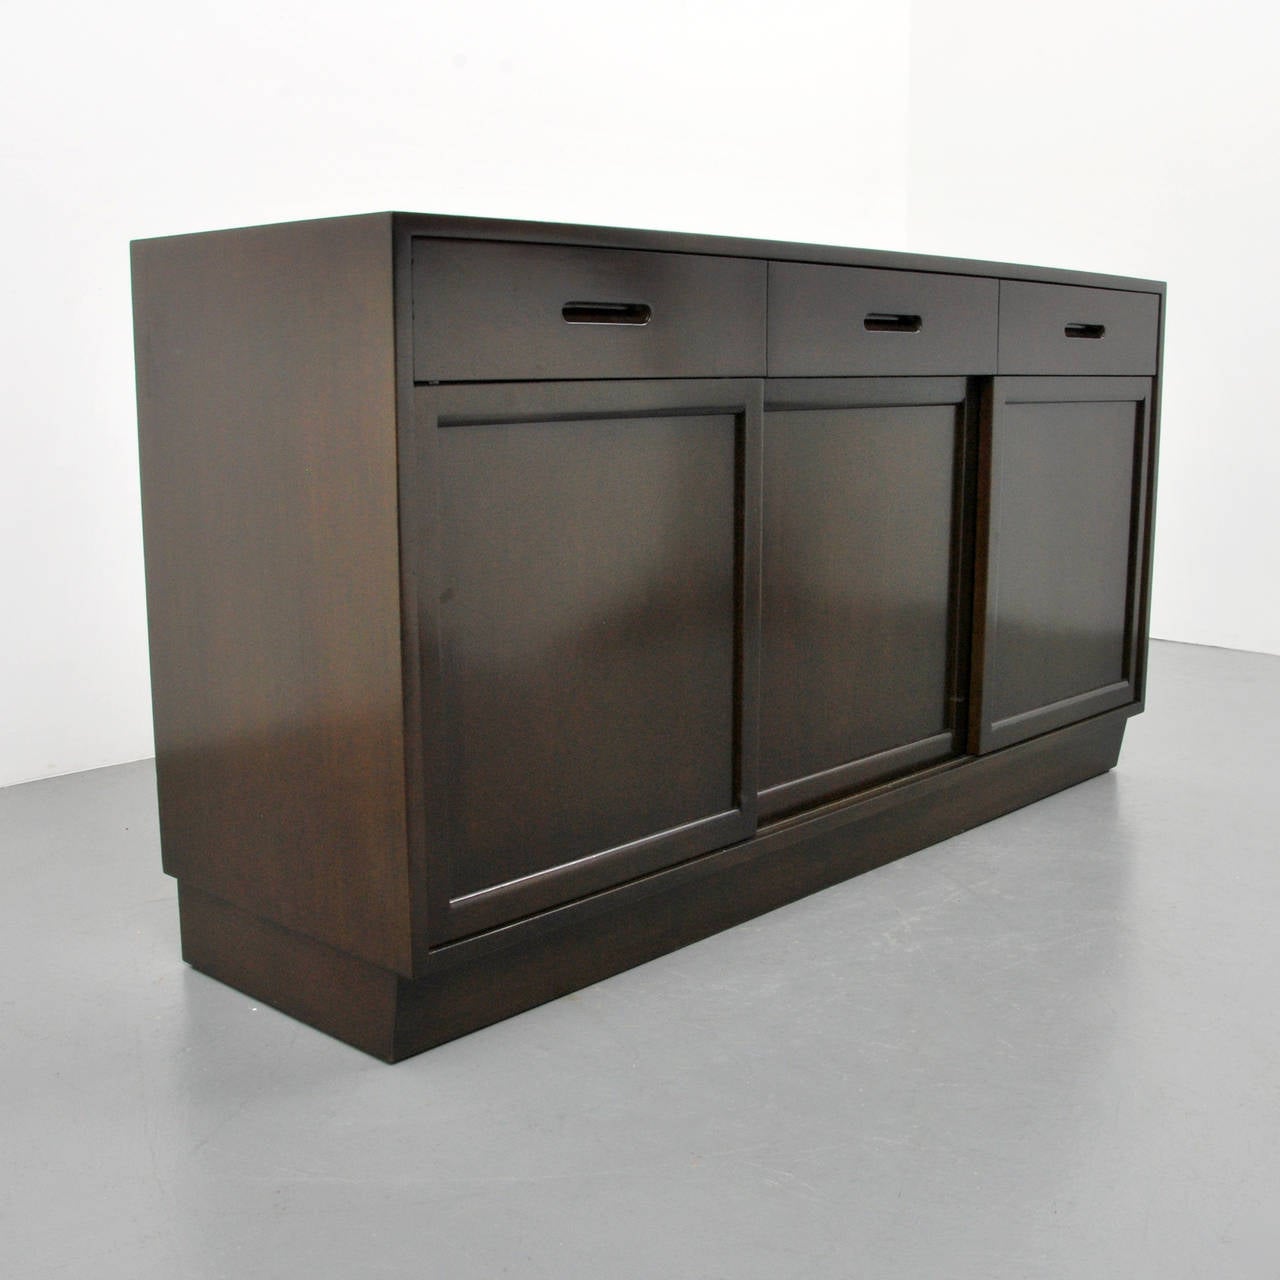 Cabinet, dresser or server is a variation of model 5668 and features three drawers with separators, two end doors each revealing three pull-out shelves and storage, and center door revealing two adjustable shelves. Reference (similar form): Dunbar